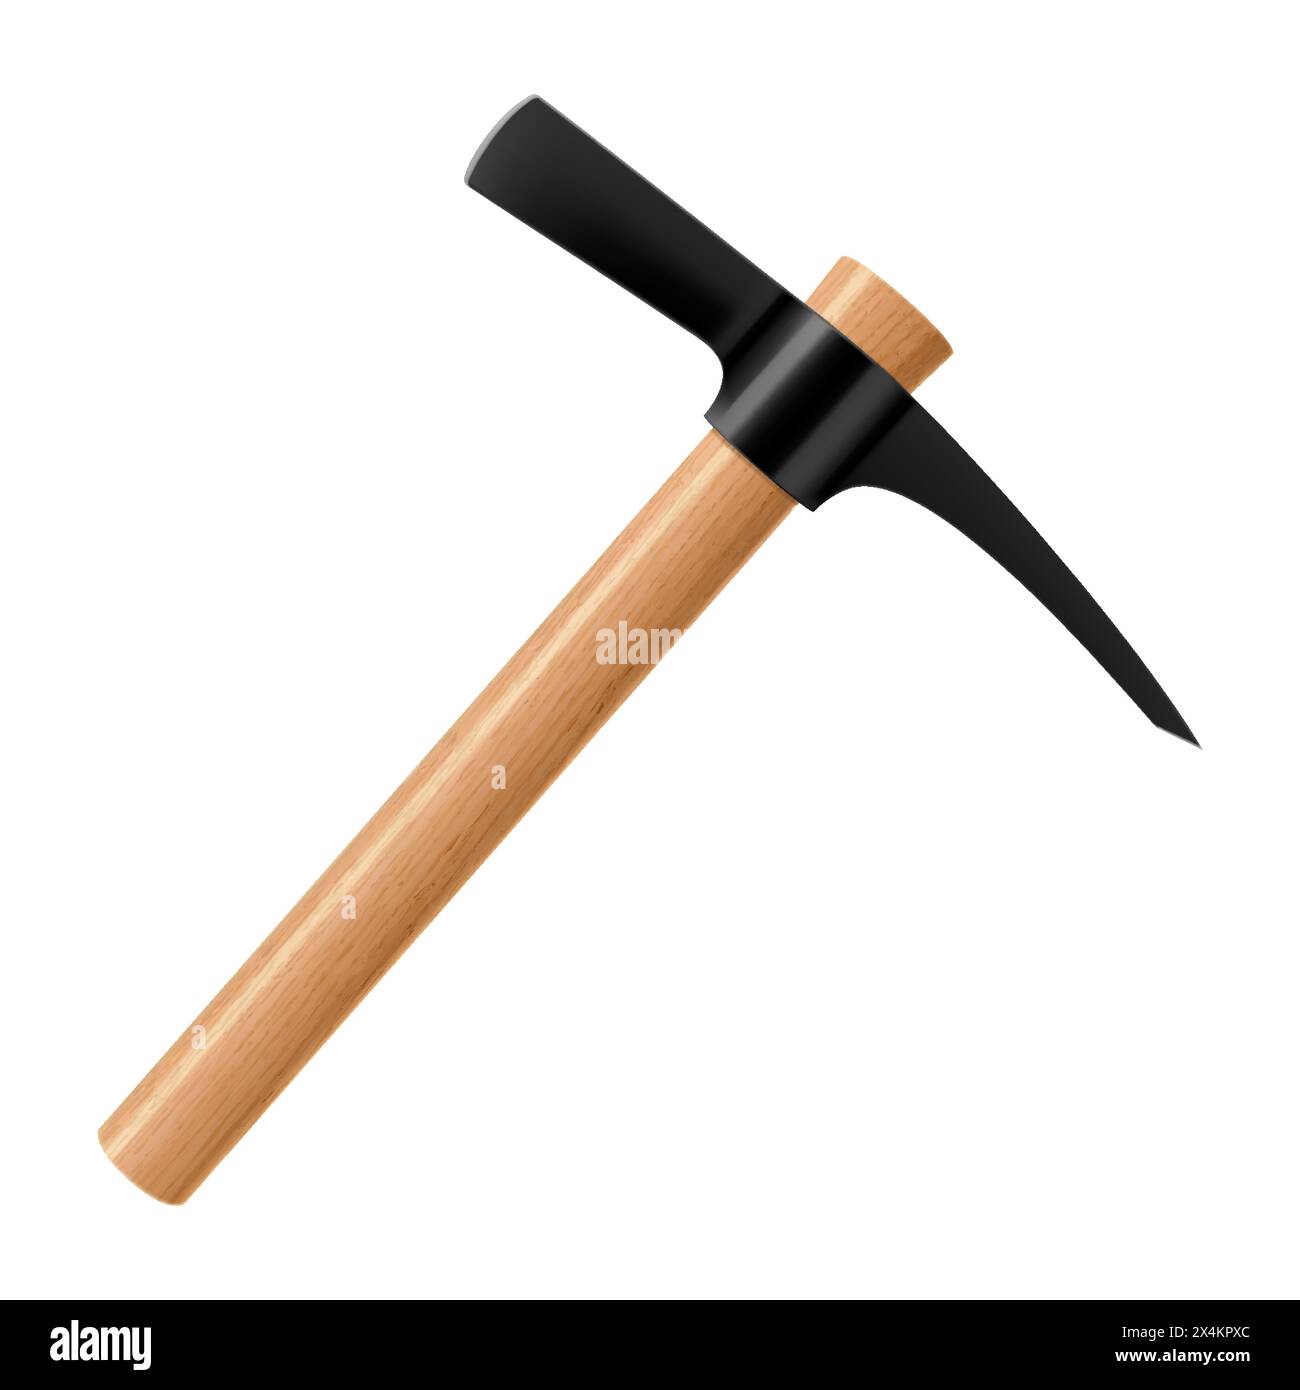 Pickaxe hammer isolated on white background. Rock hammer tool. Hand percussion tool for master stonemasons, builders, sculptors for processing various Stock Vector